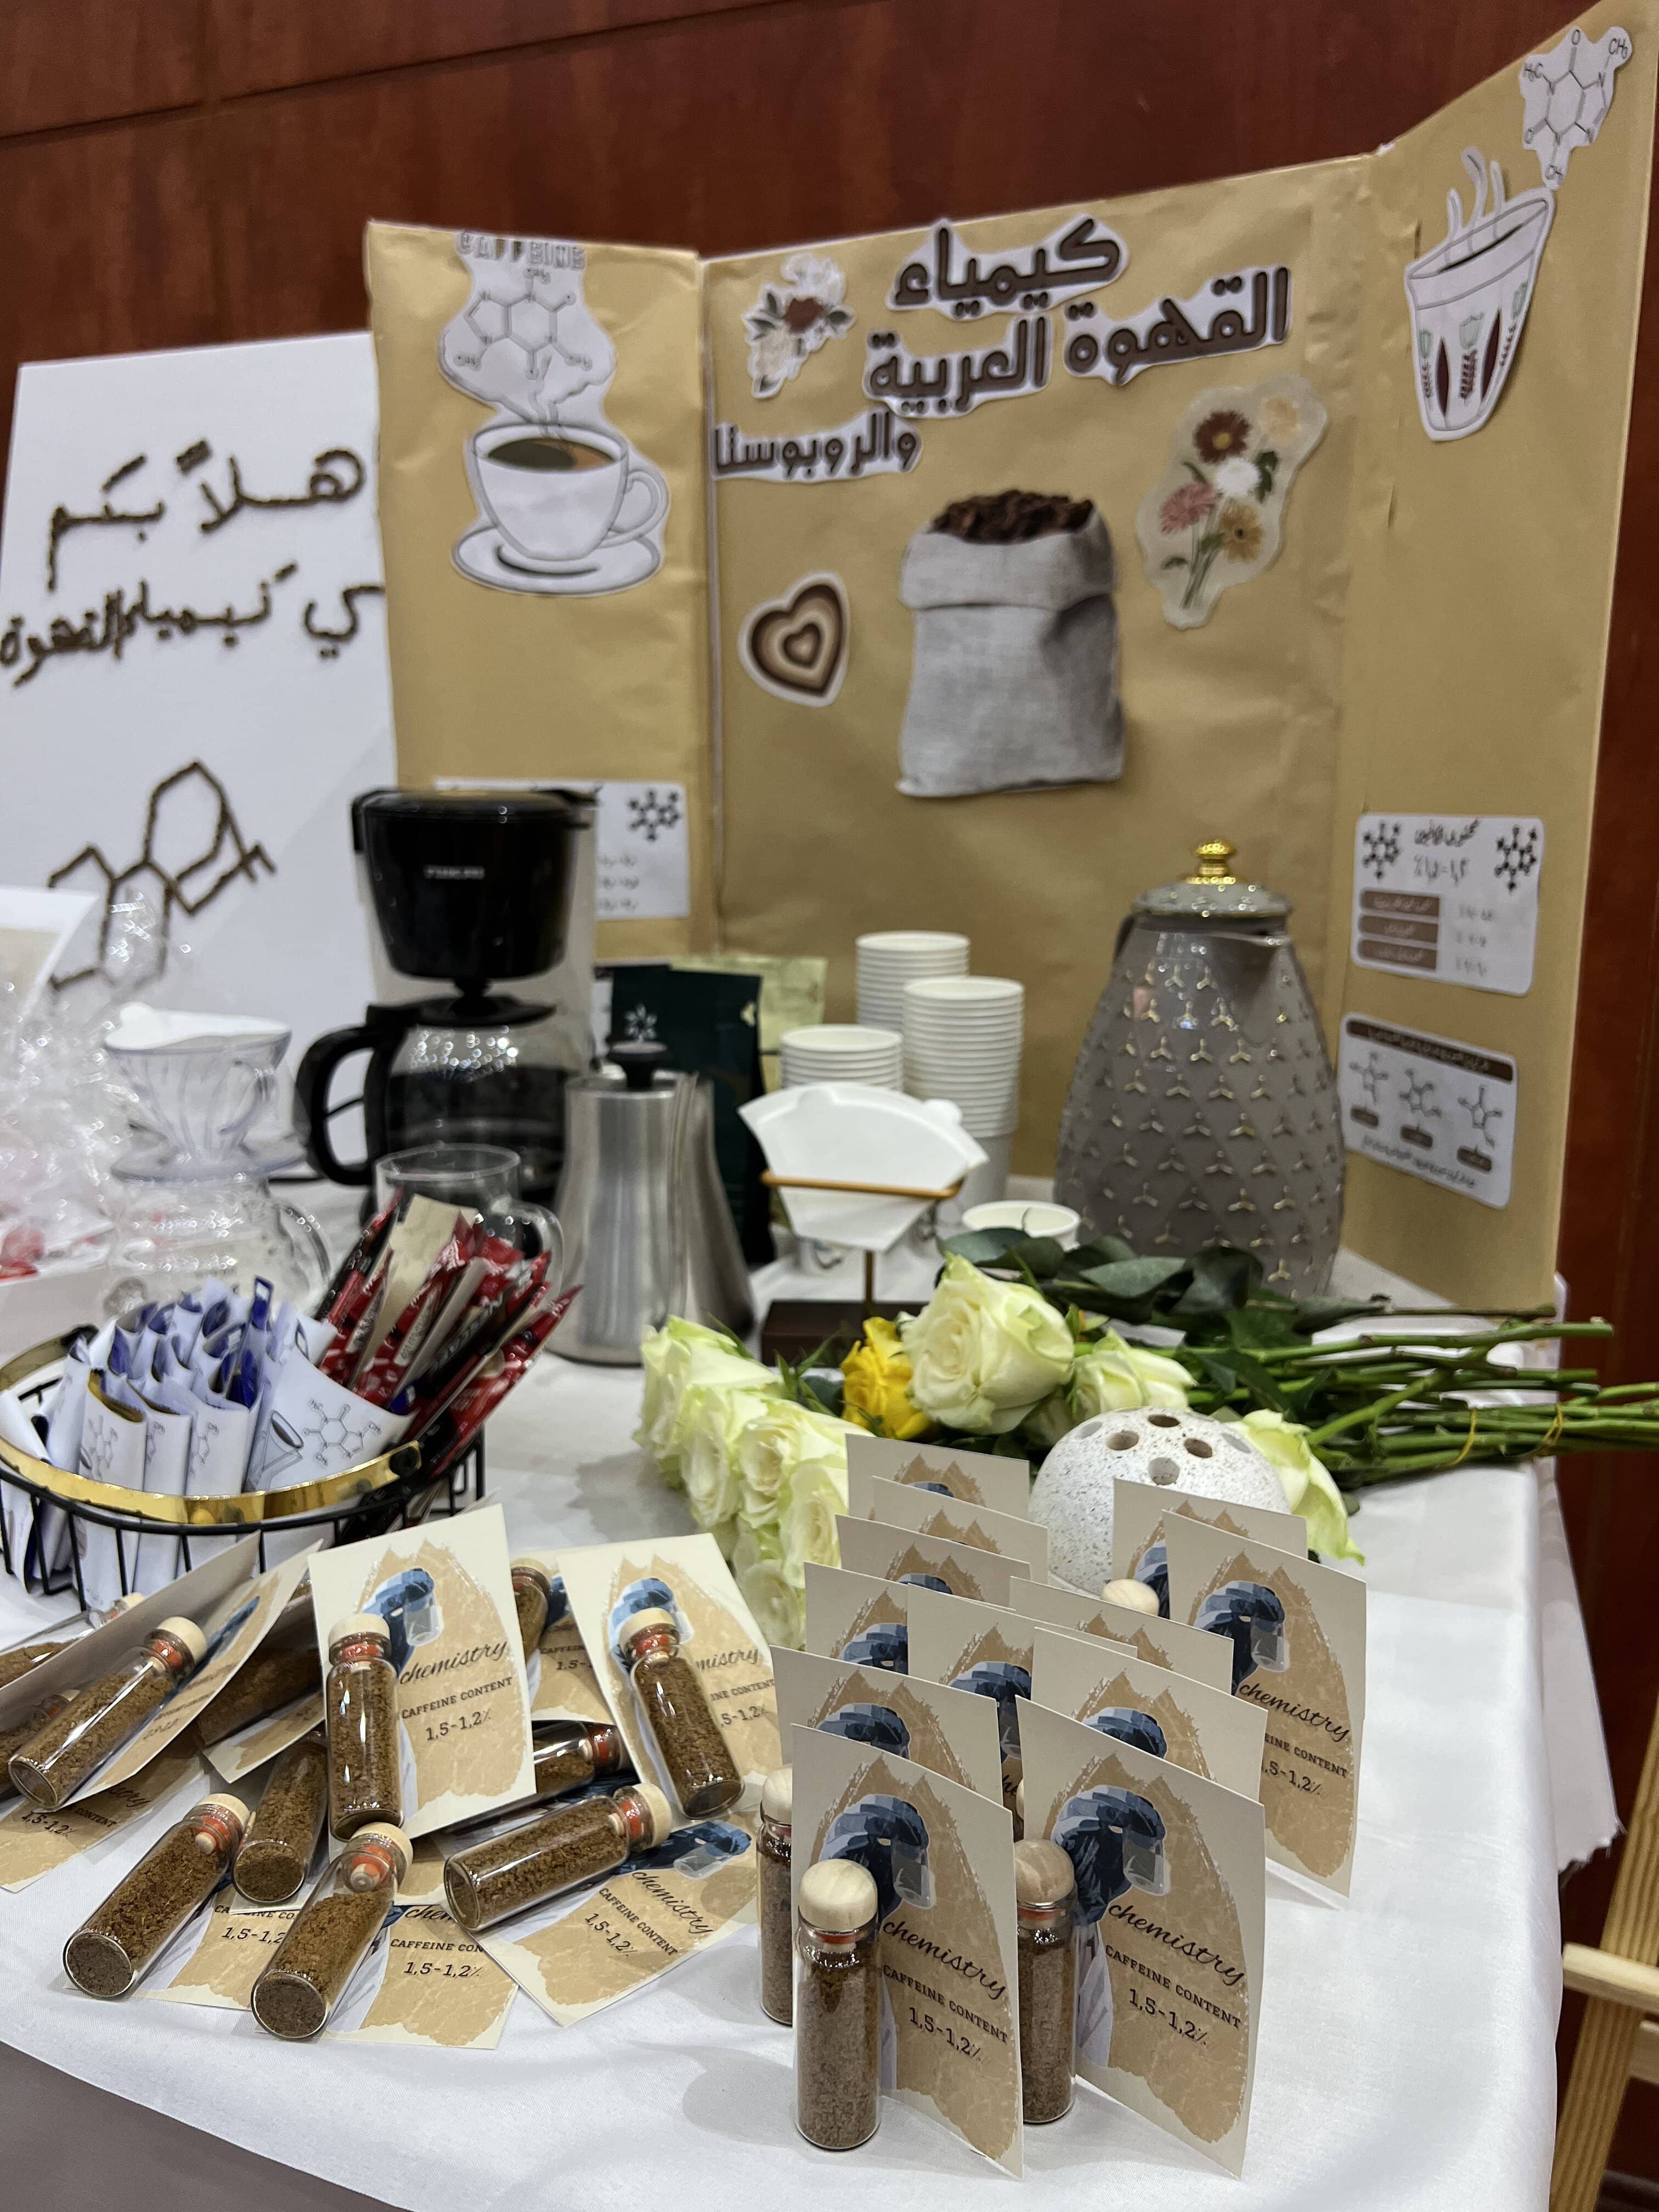 The Girls College Complex in Qurayyat celebrated the Arab Chemistry Week